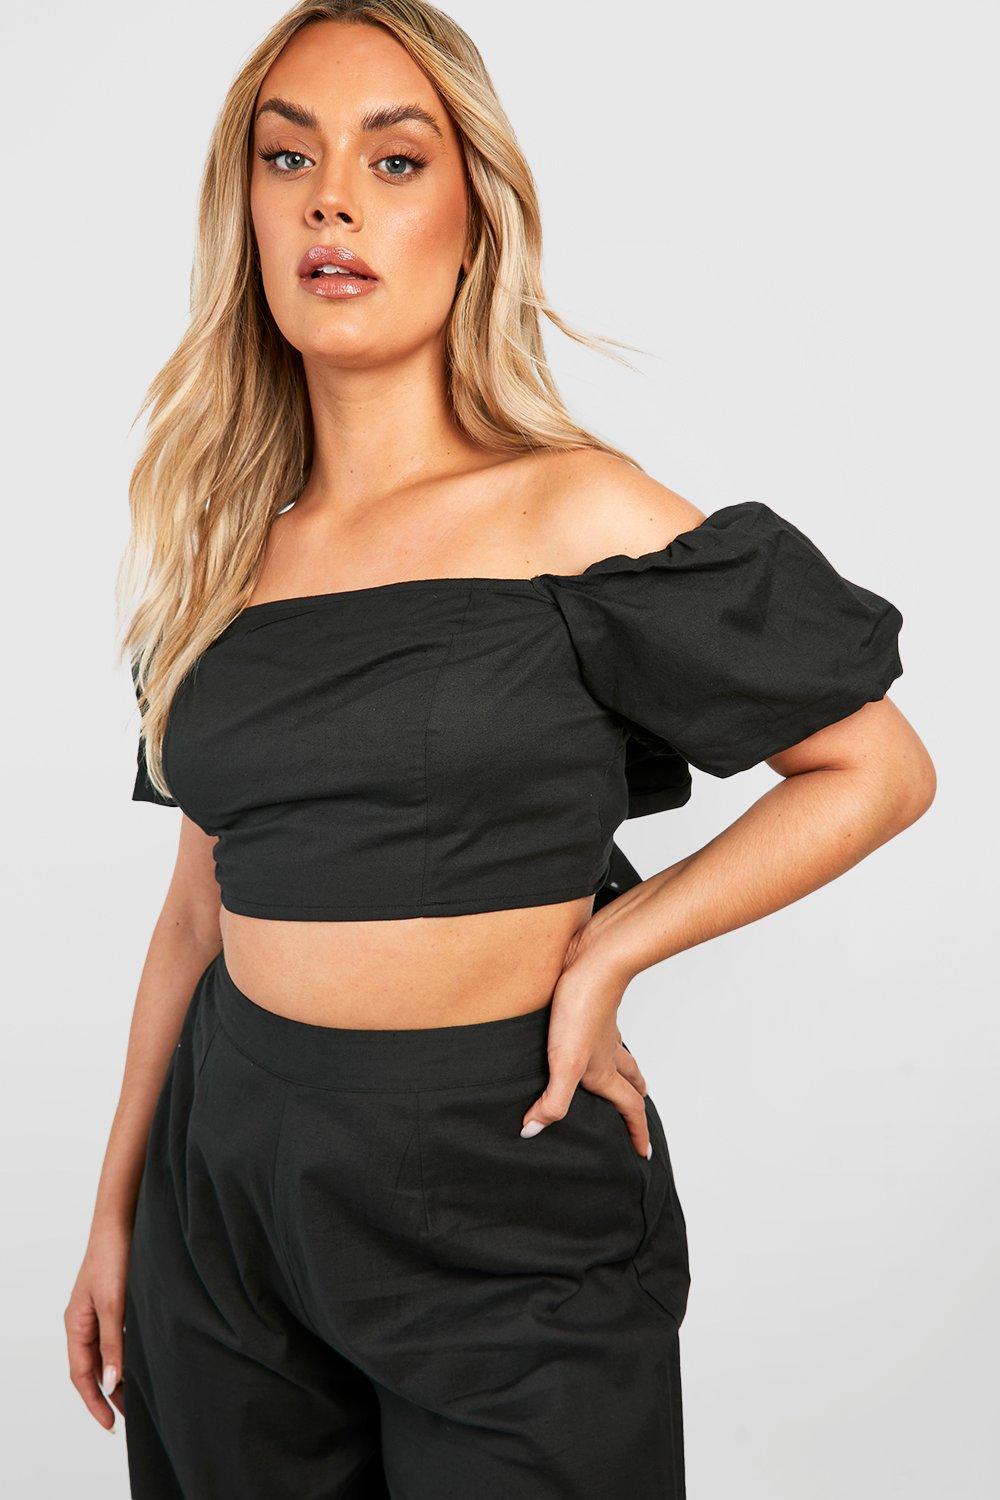 Lionel Green Street Fjern Sæbe Plus Cotton Off Shoulder Top & Pants Two-Piece | boohoo